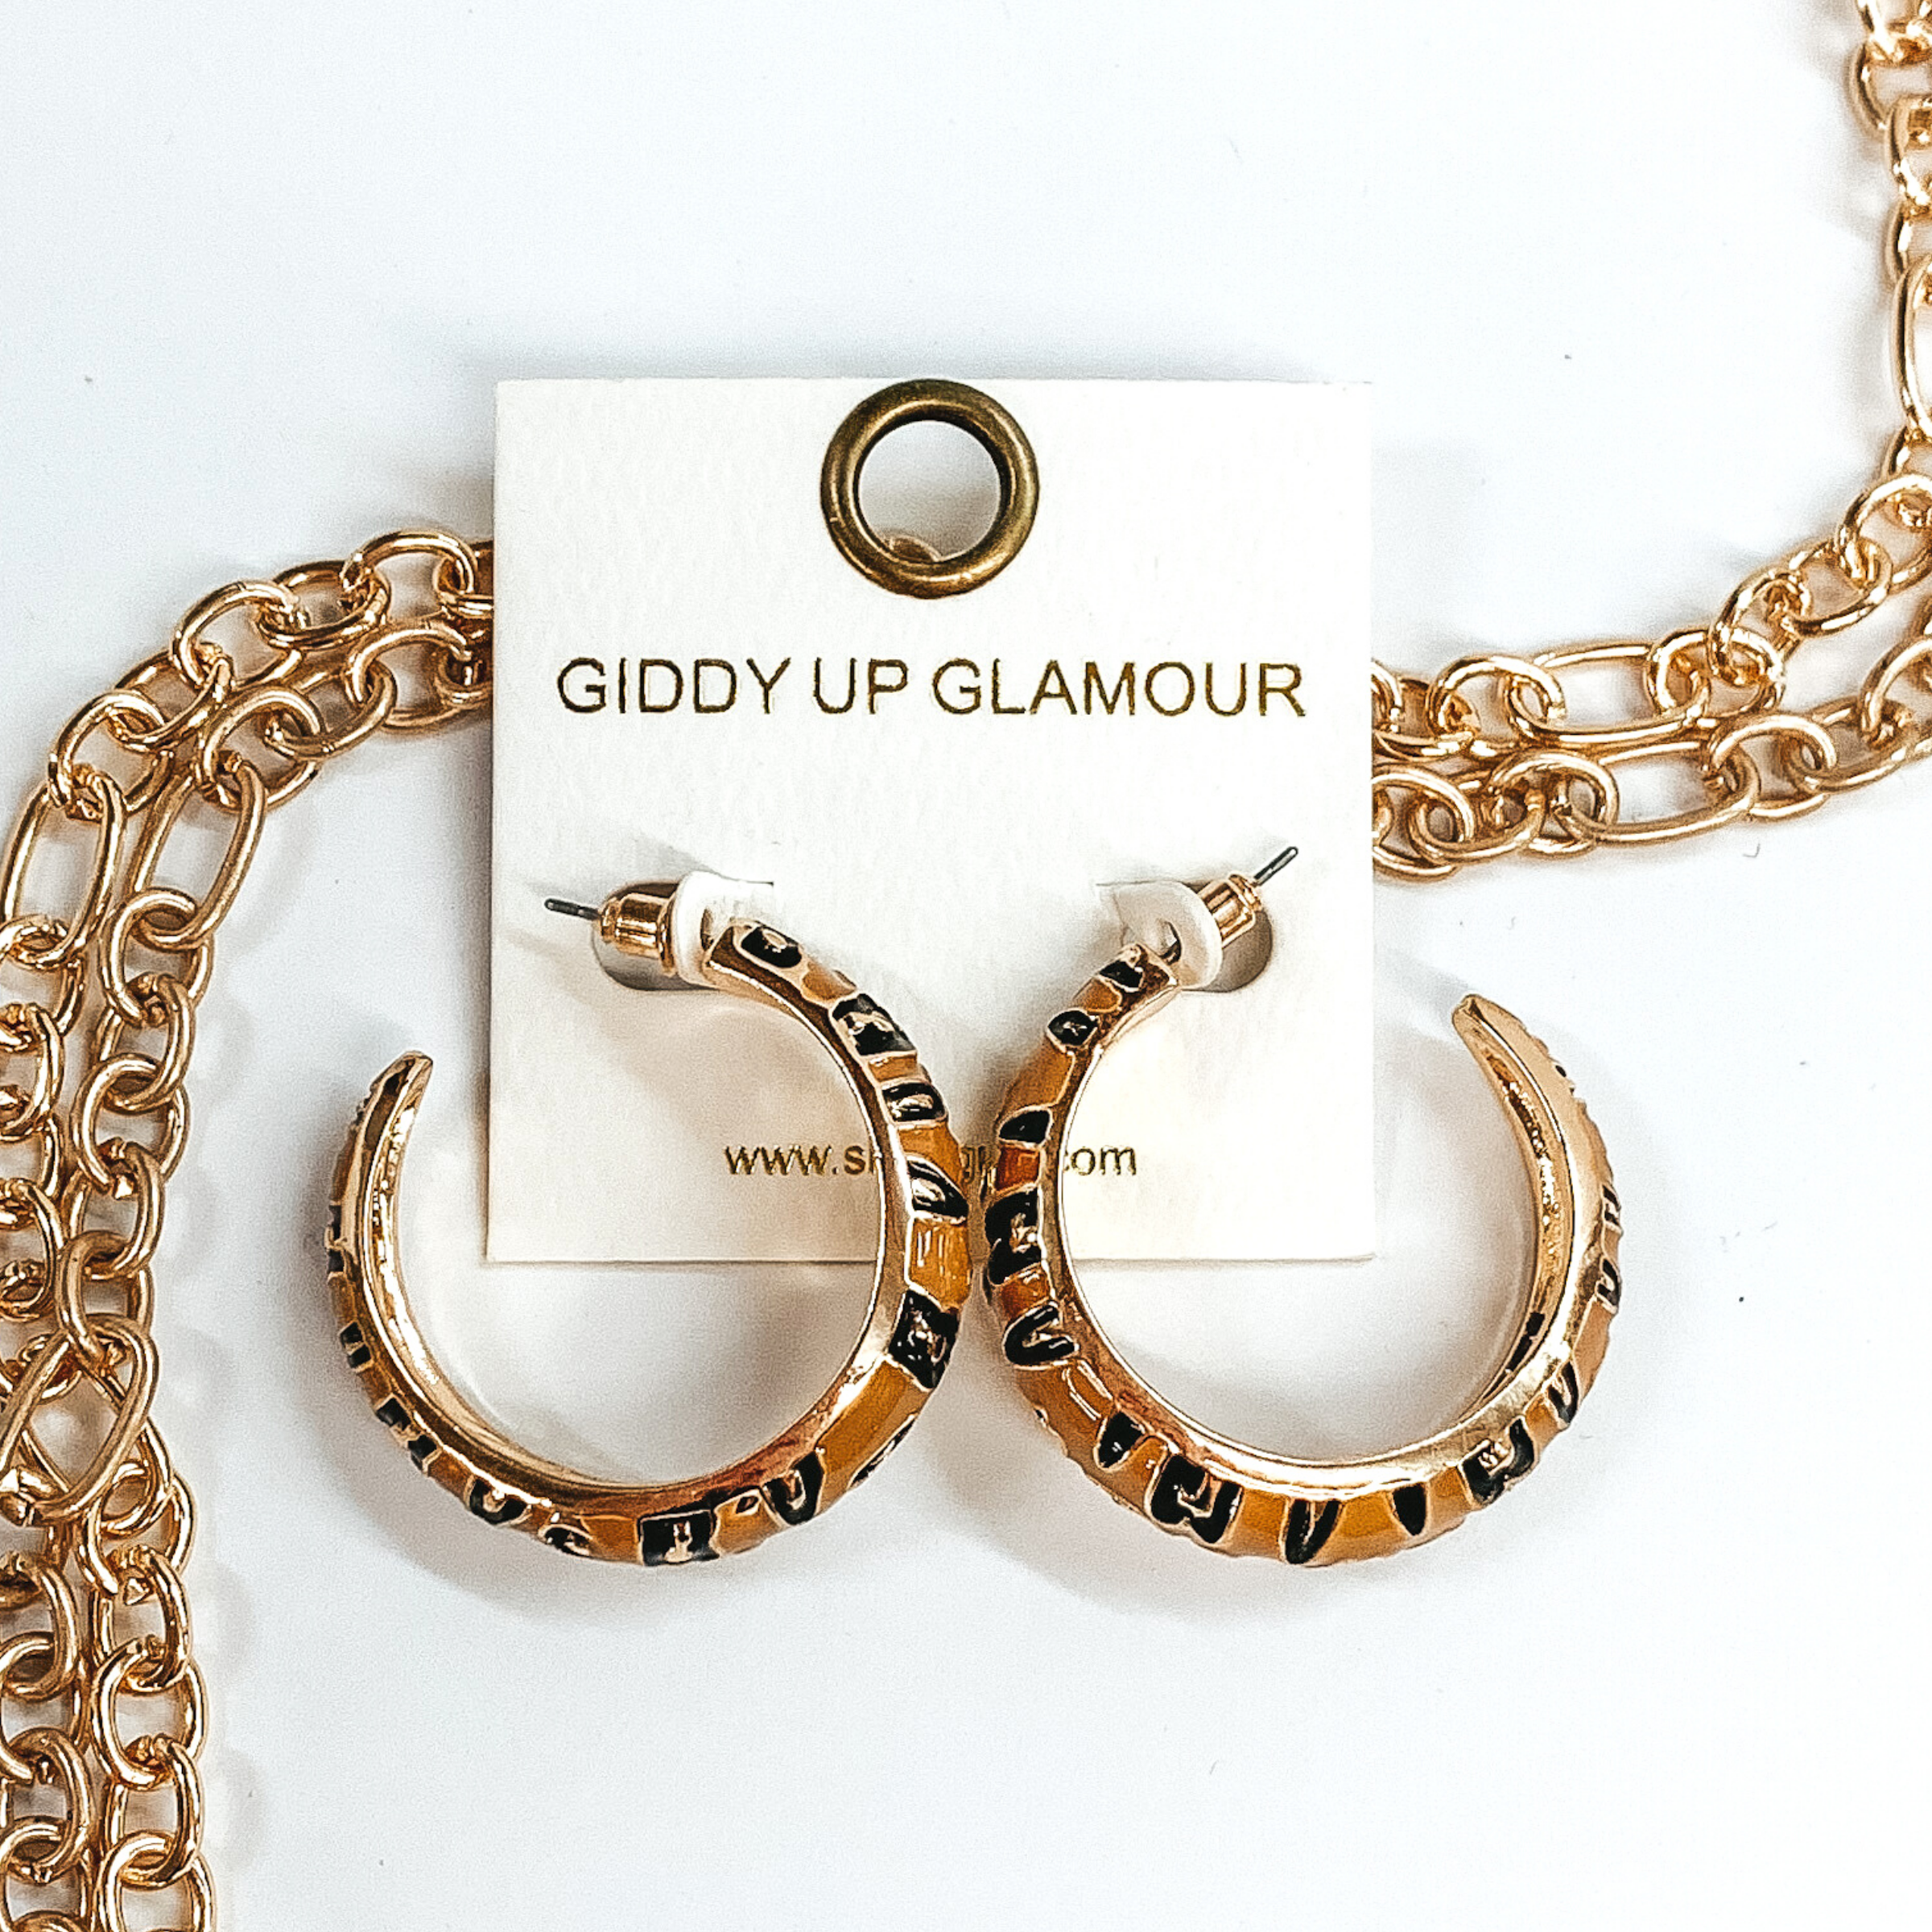 Large, gold outline, tan hoop earrings with black and gold leopard print.These earrings are pictured on a white earrings holder, laying on top of gold chains on a white background. 